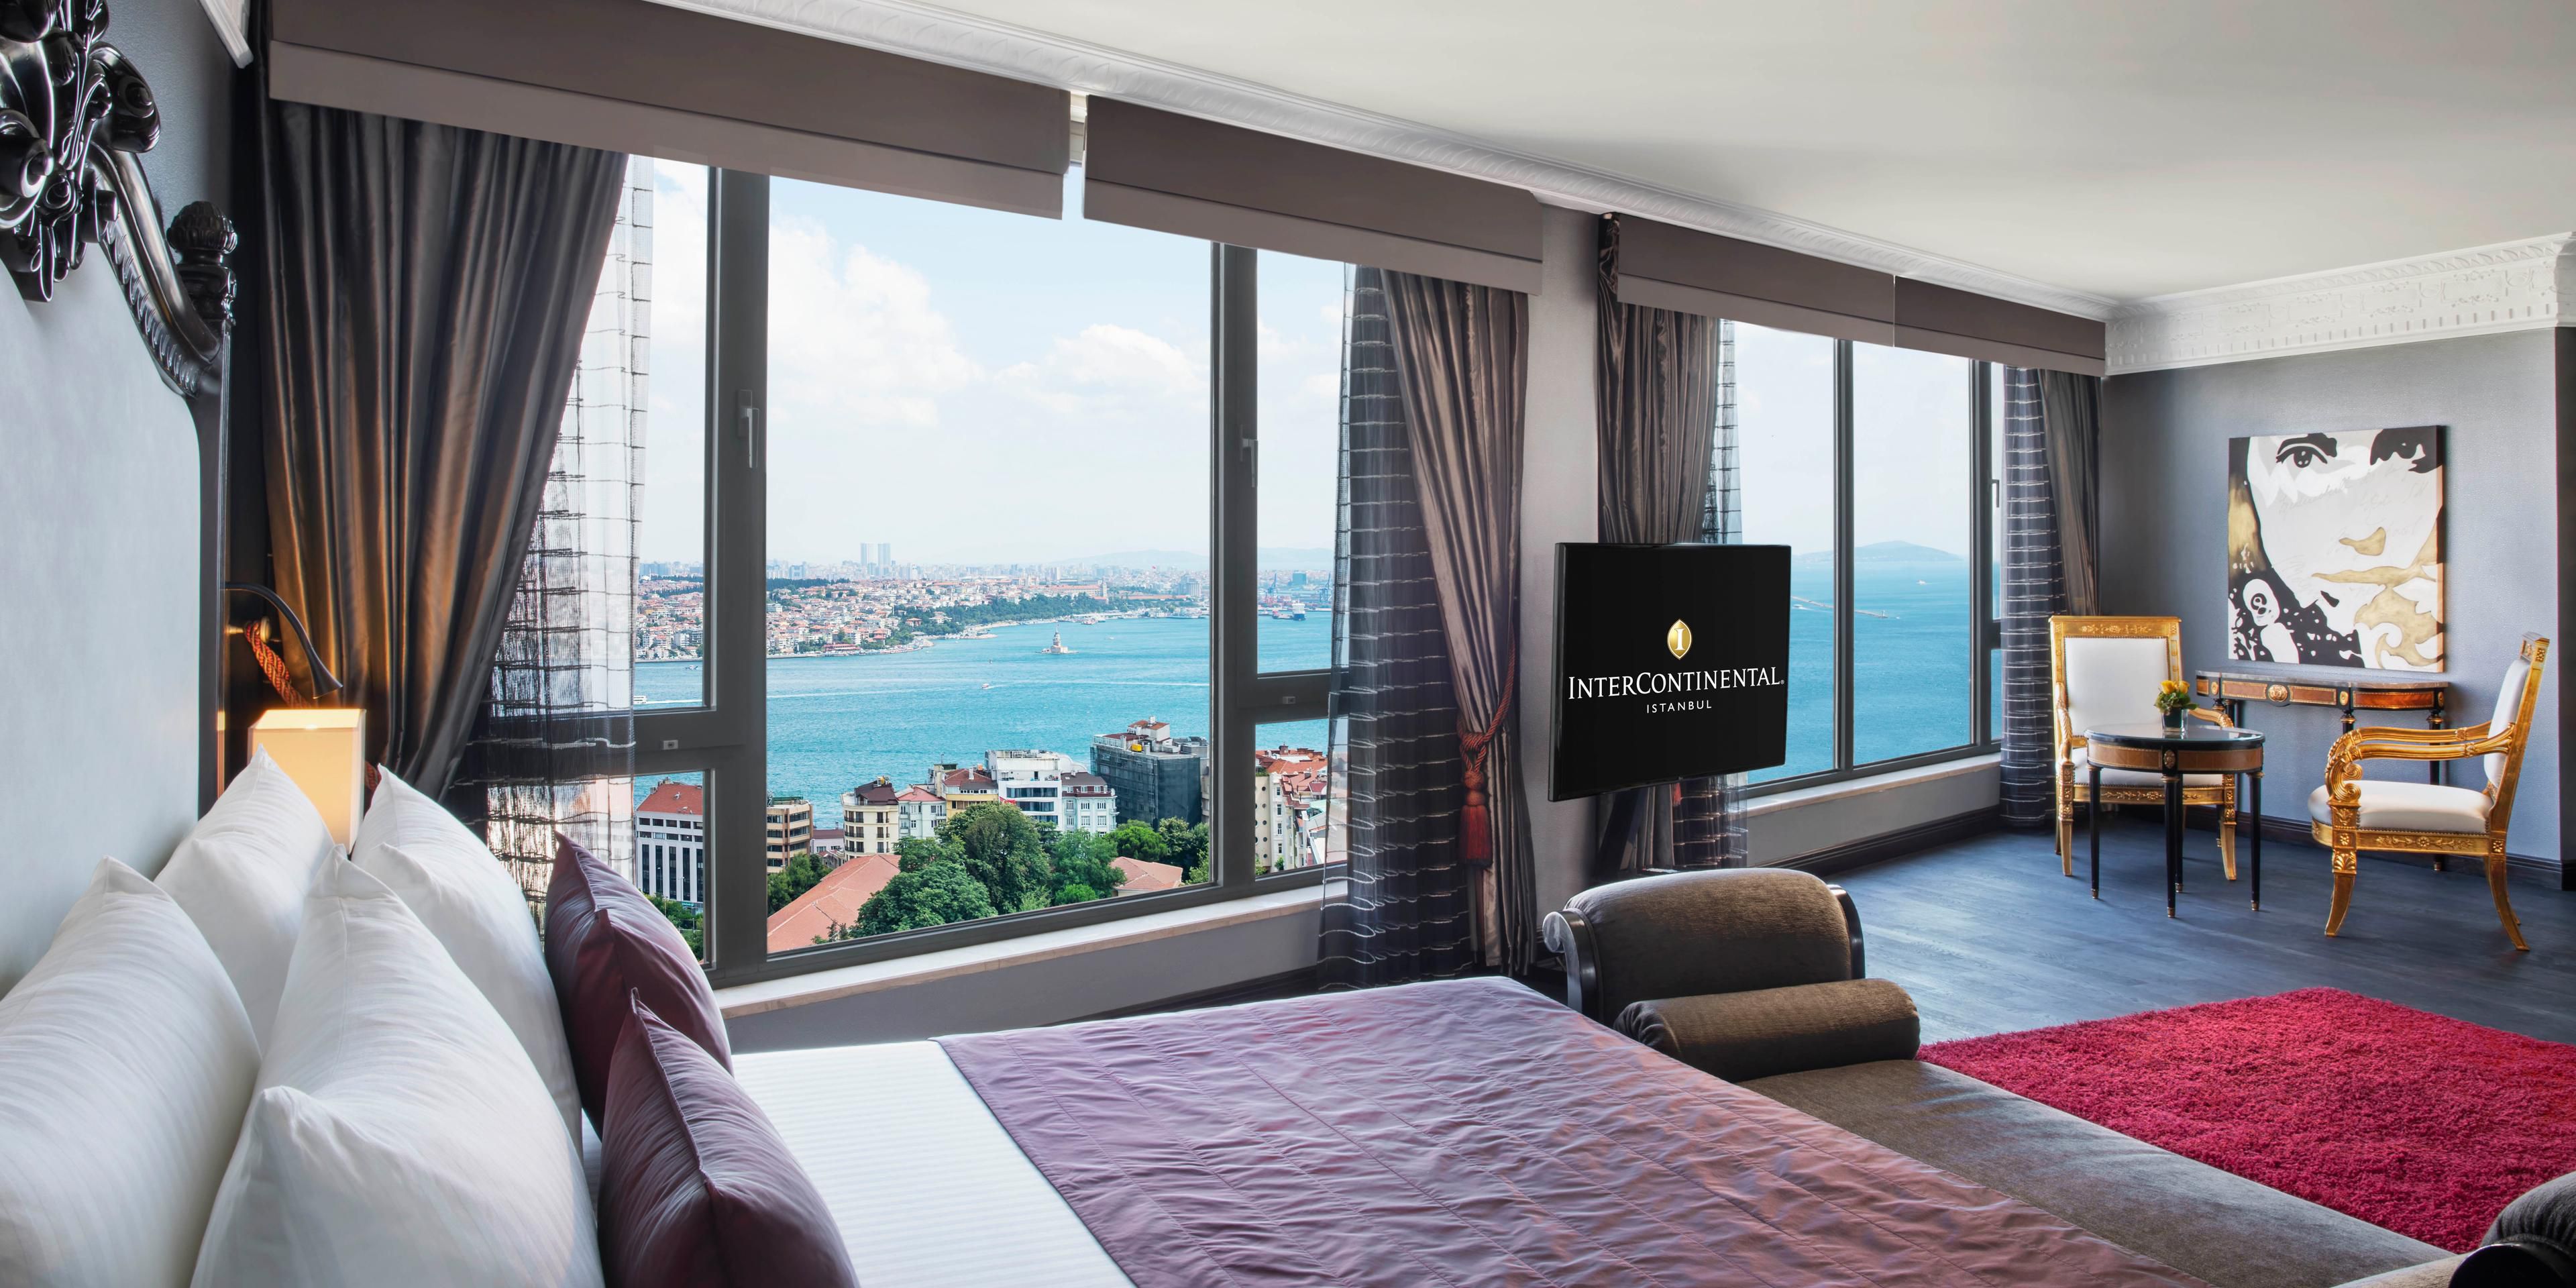 Voted Best Suite in Turkey by the World Travel Awards, Concept Suite offers a unique comfort. The smart design and breathtaking view of our suite are the key factors in its success.